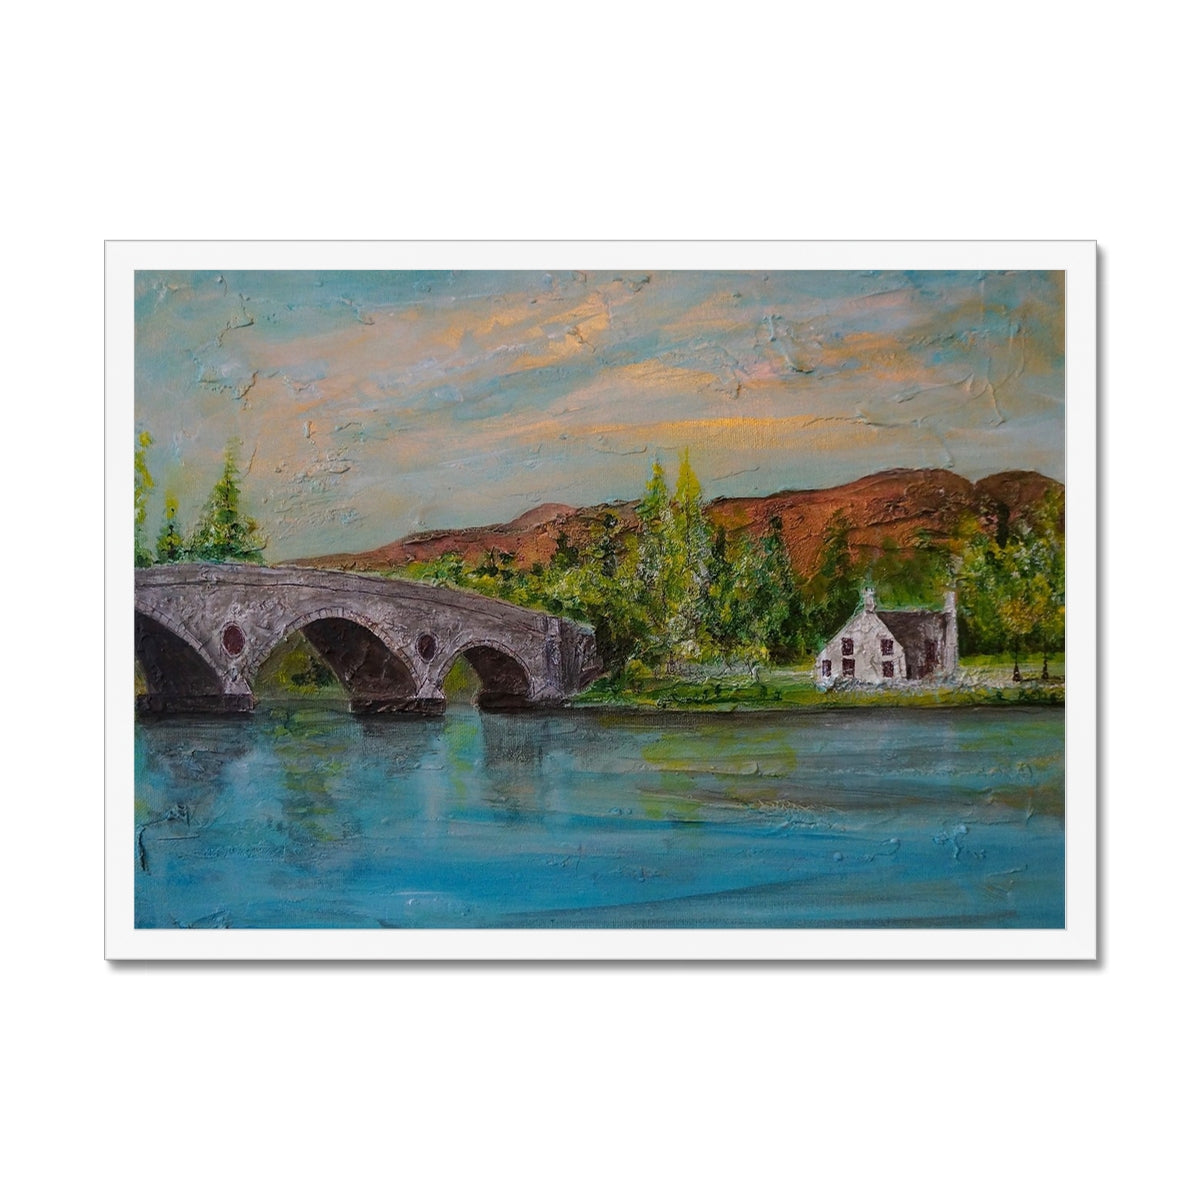 Kenmore Bridge ii Painting | Framed Prints From Scotland-Framed Prints-Scottish Highlands & Lowlands Art Gallery-A2 Landscape-White Frame-Paintings, Prints, Homeware, Art Gifts From Scotland By Scottish Artist Kevin Hunter